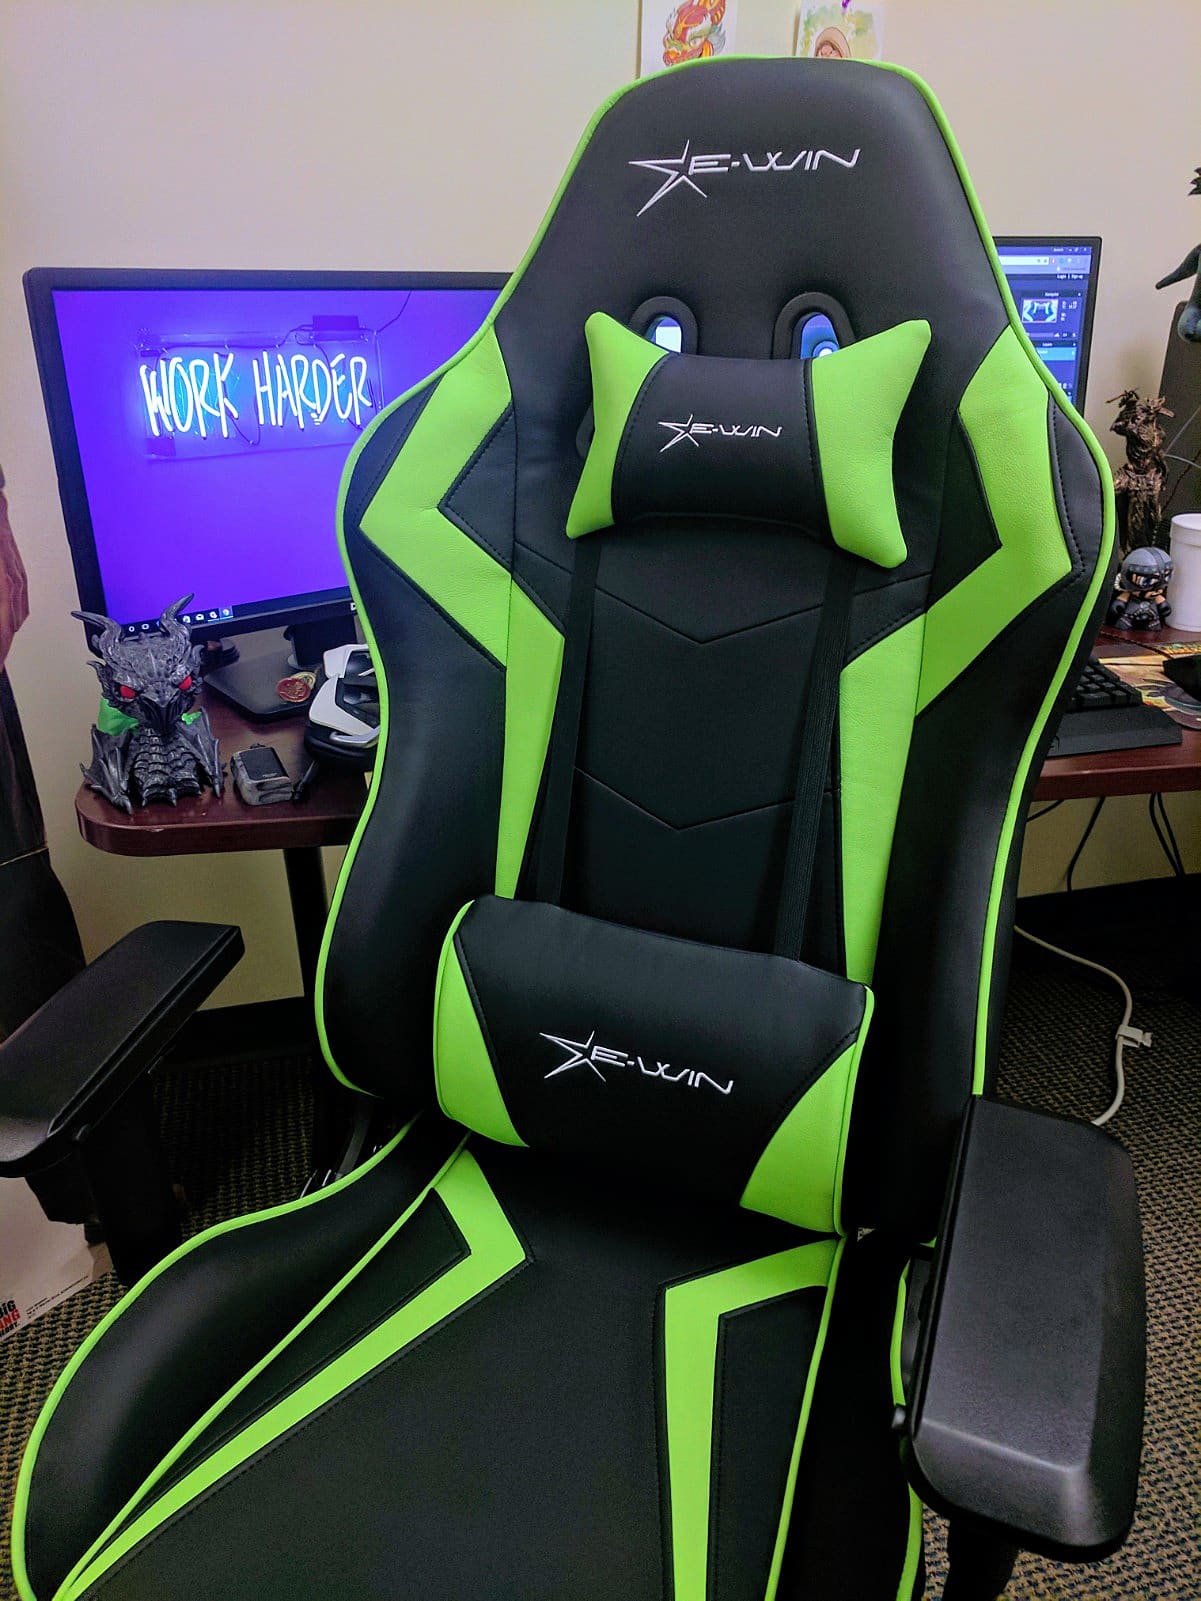 Motivering noget kærtegn EWin Champion Series Gaming Chair Review: Sturdy, Comfy, and Sleek (Oh My!)